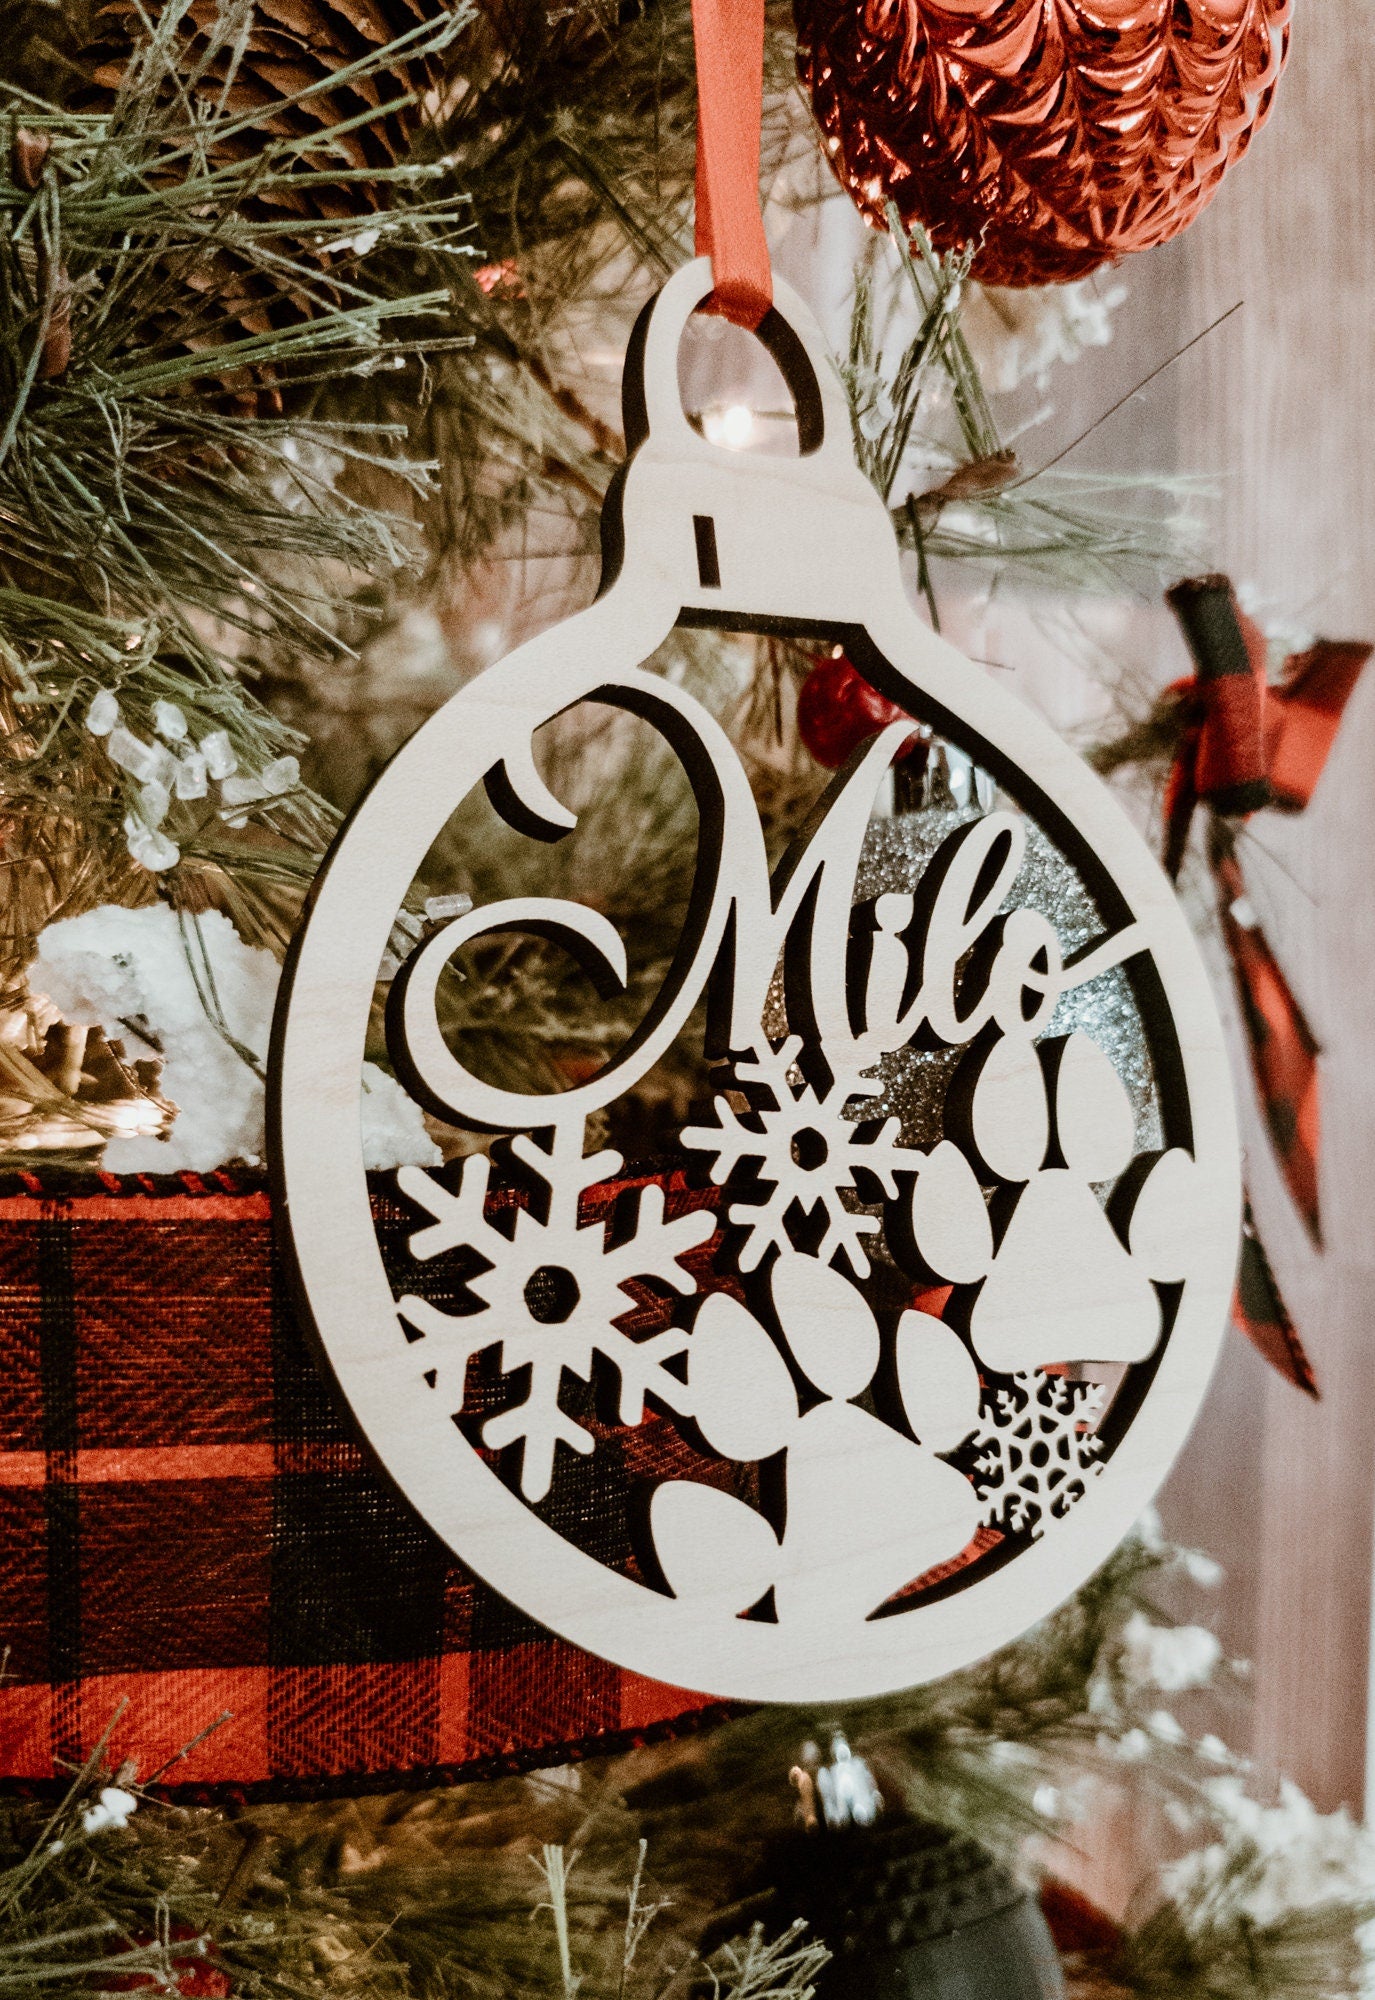 Personalized Pet Paw Print Christmas Ornament Bulb Custom Wood Dog or Cat Print xmas Tree Ornaments, Wooden Stocking Name Tags For Pet Decor